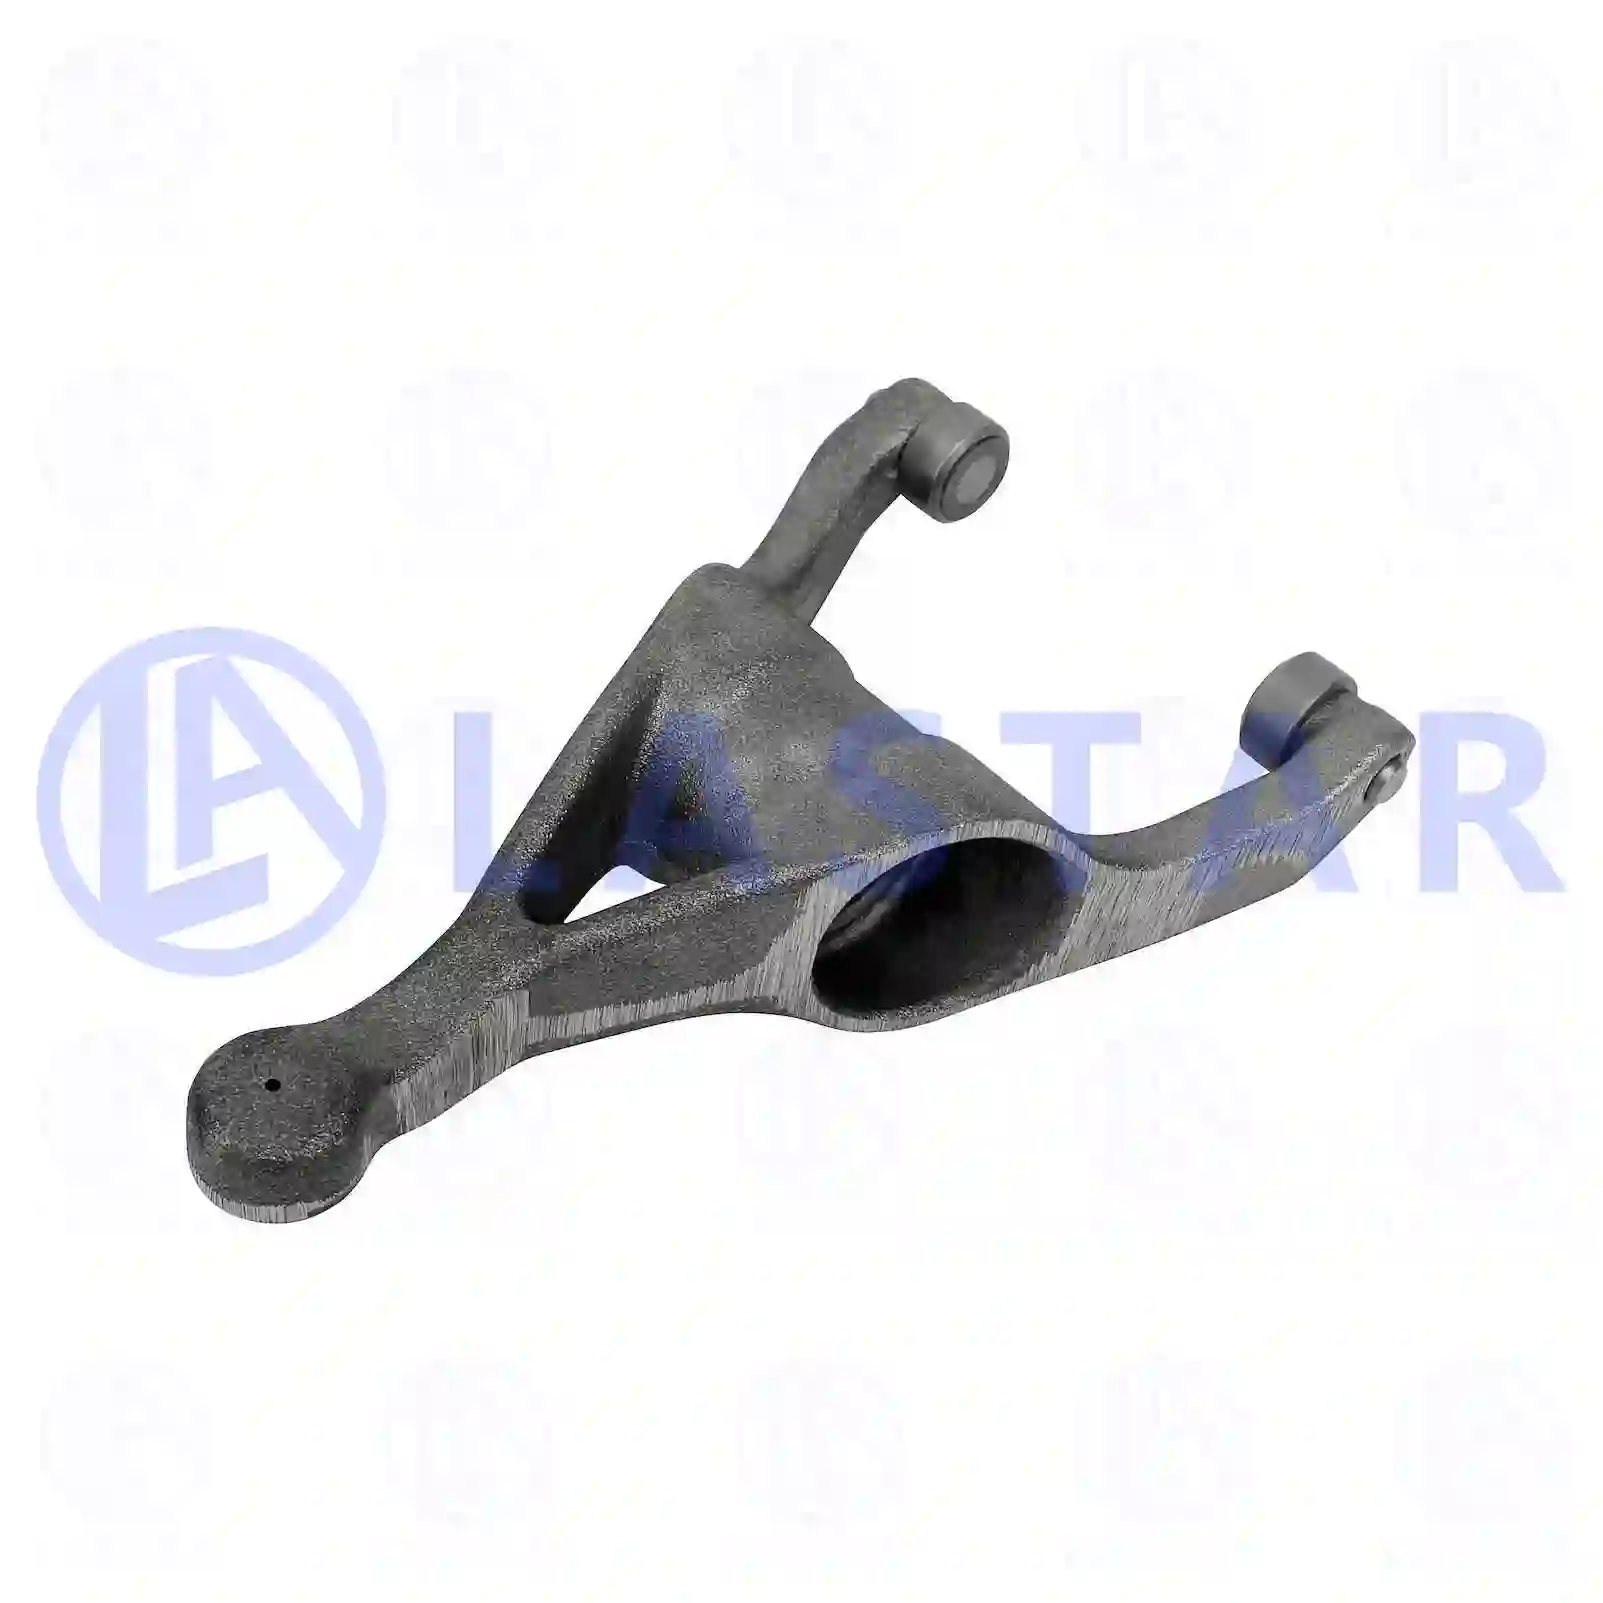 Release fork, 77722498, 9402500213 ||  77722498 Lastar Spare Part | Truck Spare Parts, Auotomotive Spare Parts Release fork, 77722498, 9402500213 ||  77722498 Lastar Spare Part | Truck Spare Parts, Auotomotive Spare Parts